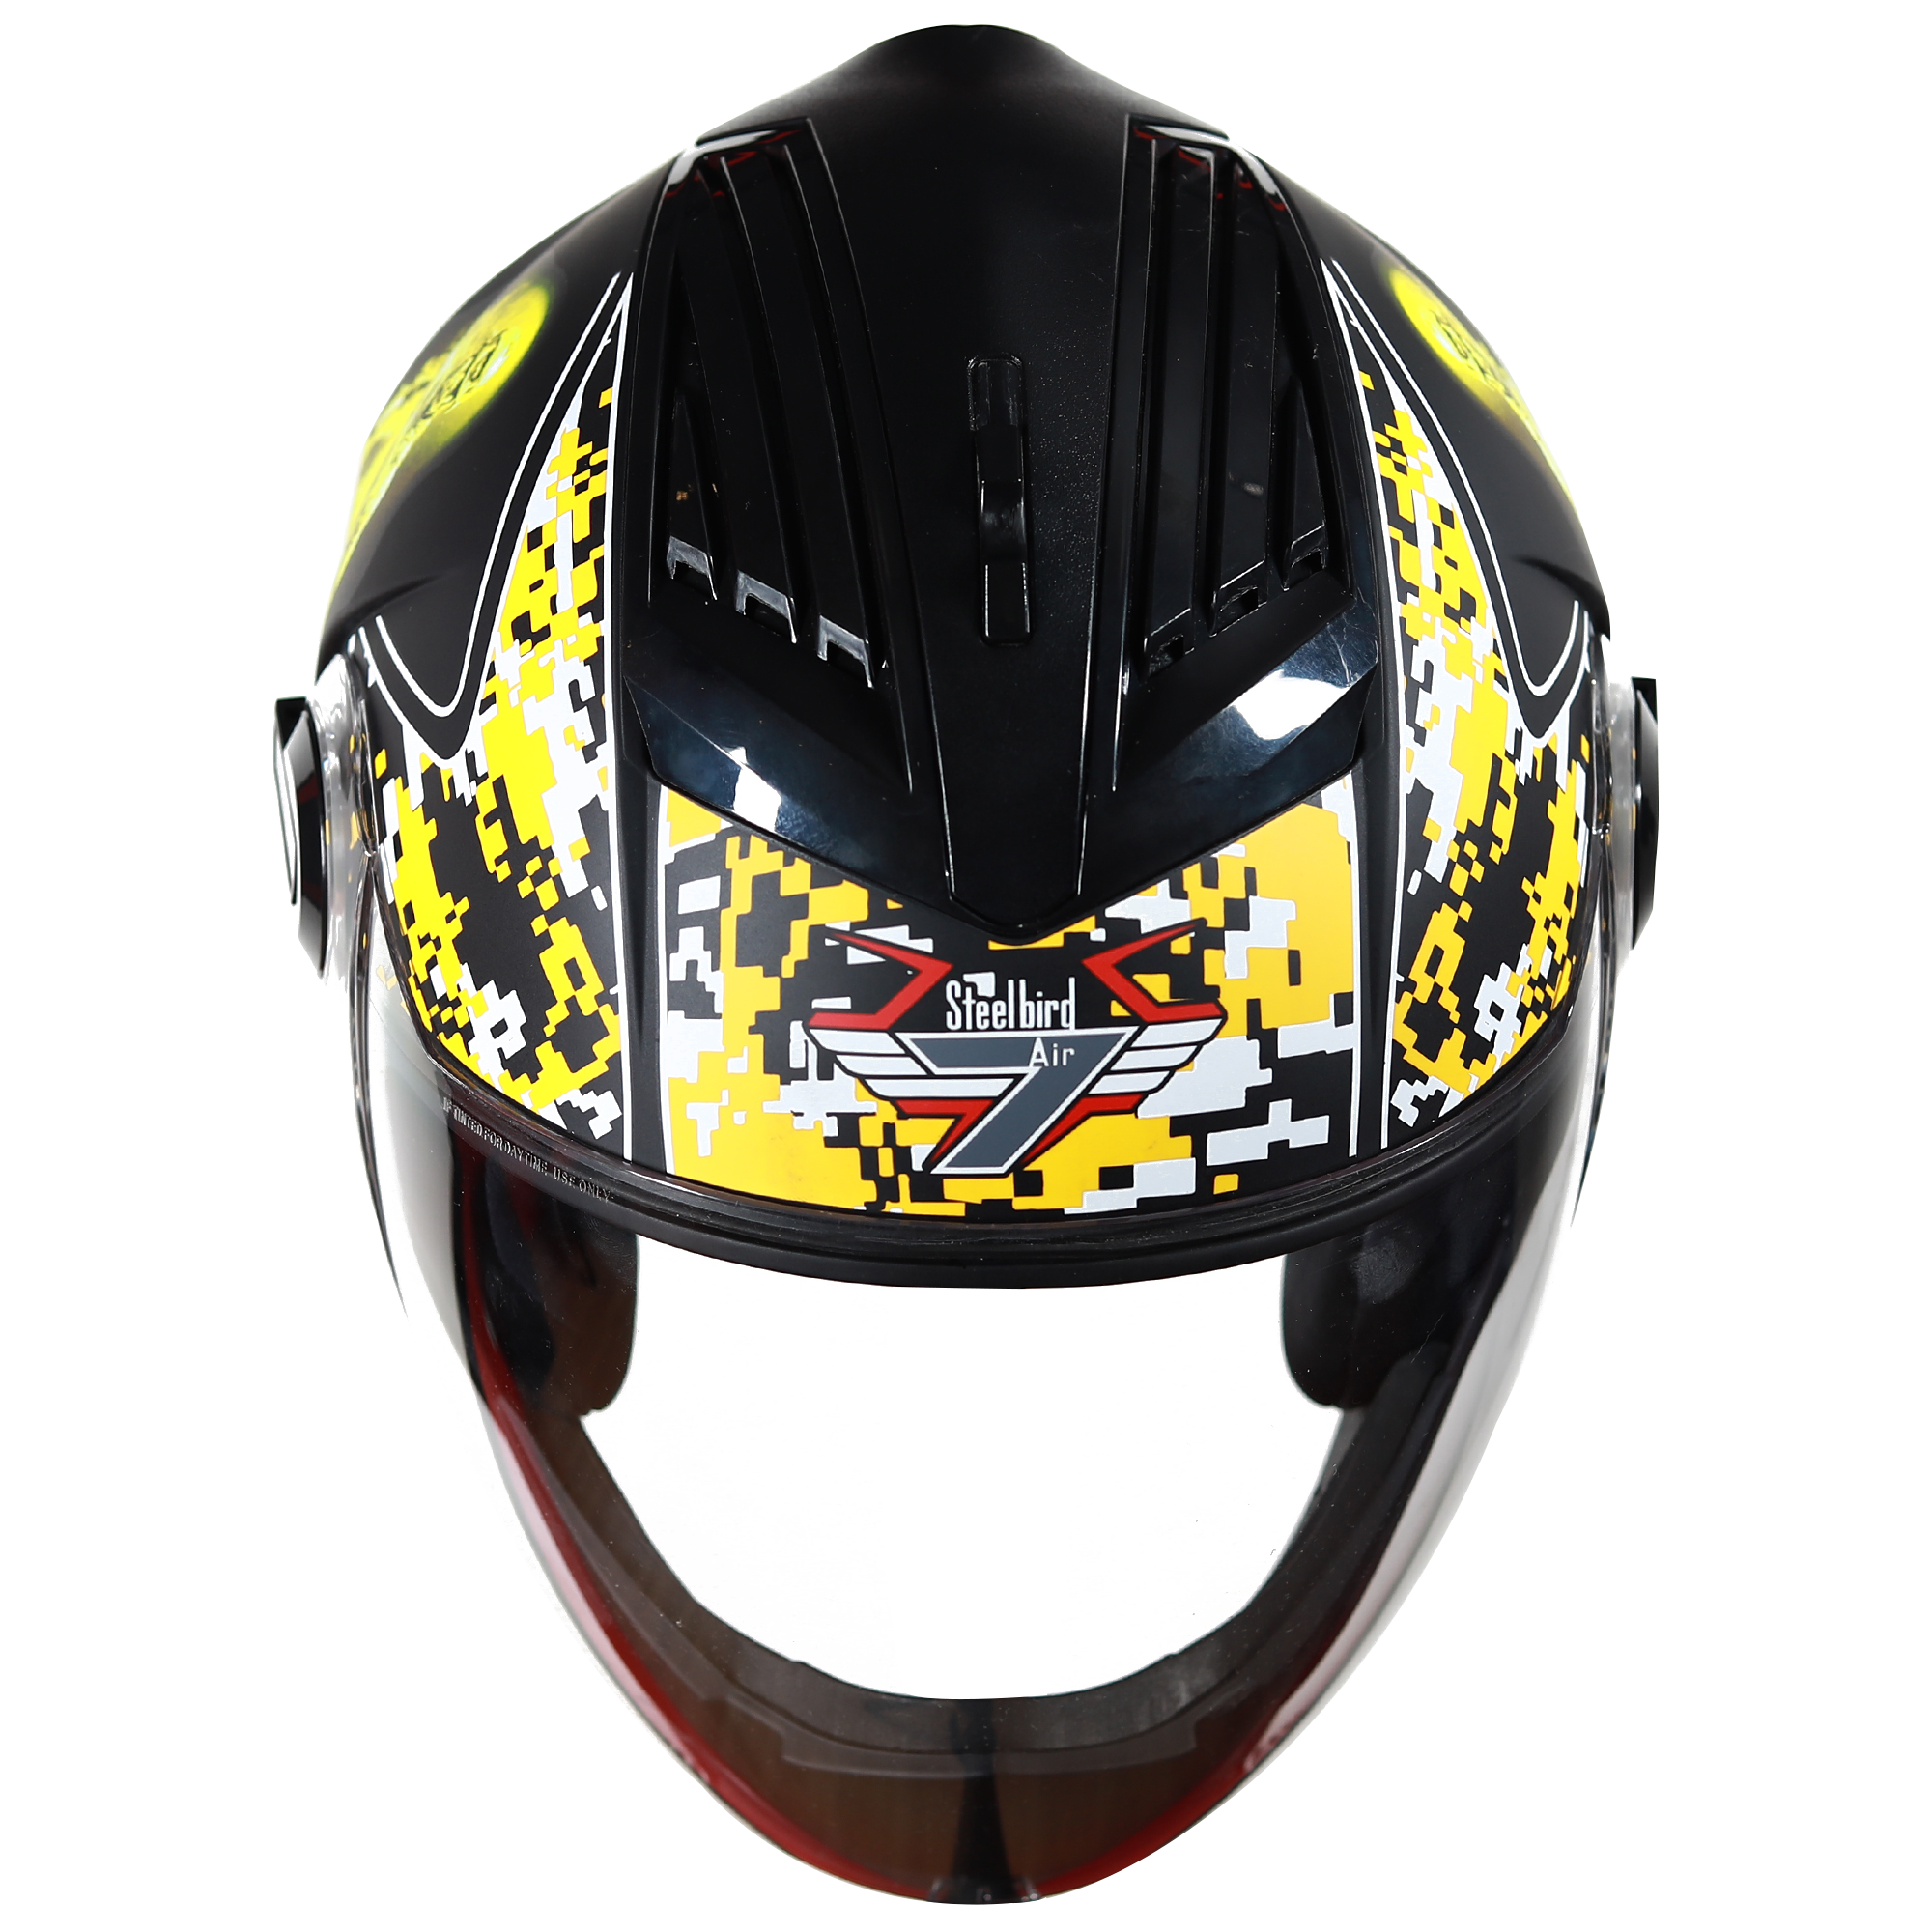 SBA-2 Marine Mat Black With Yellow ( Fitted With Clear Visor  Extra Rainbow Night Vision Visor Free)